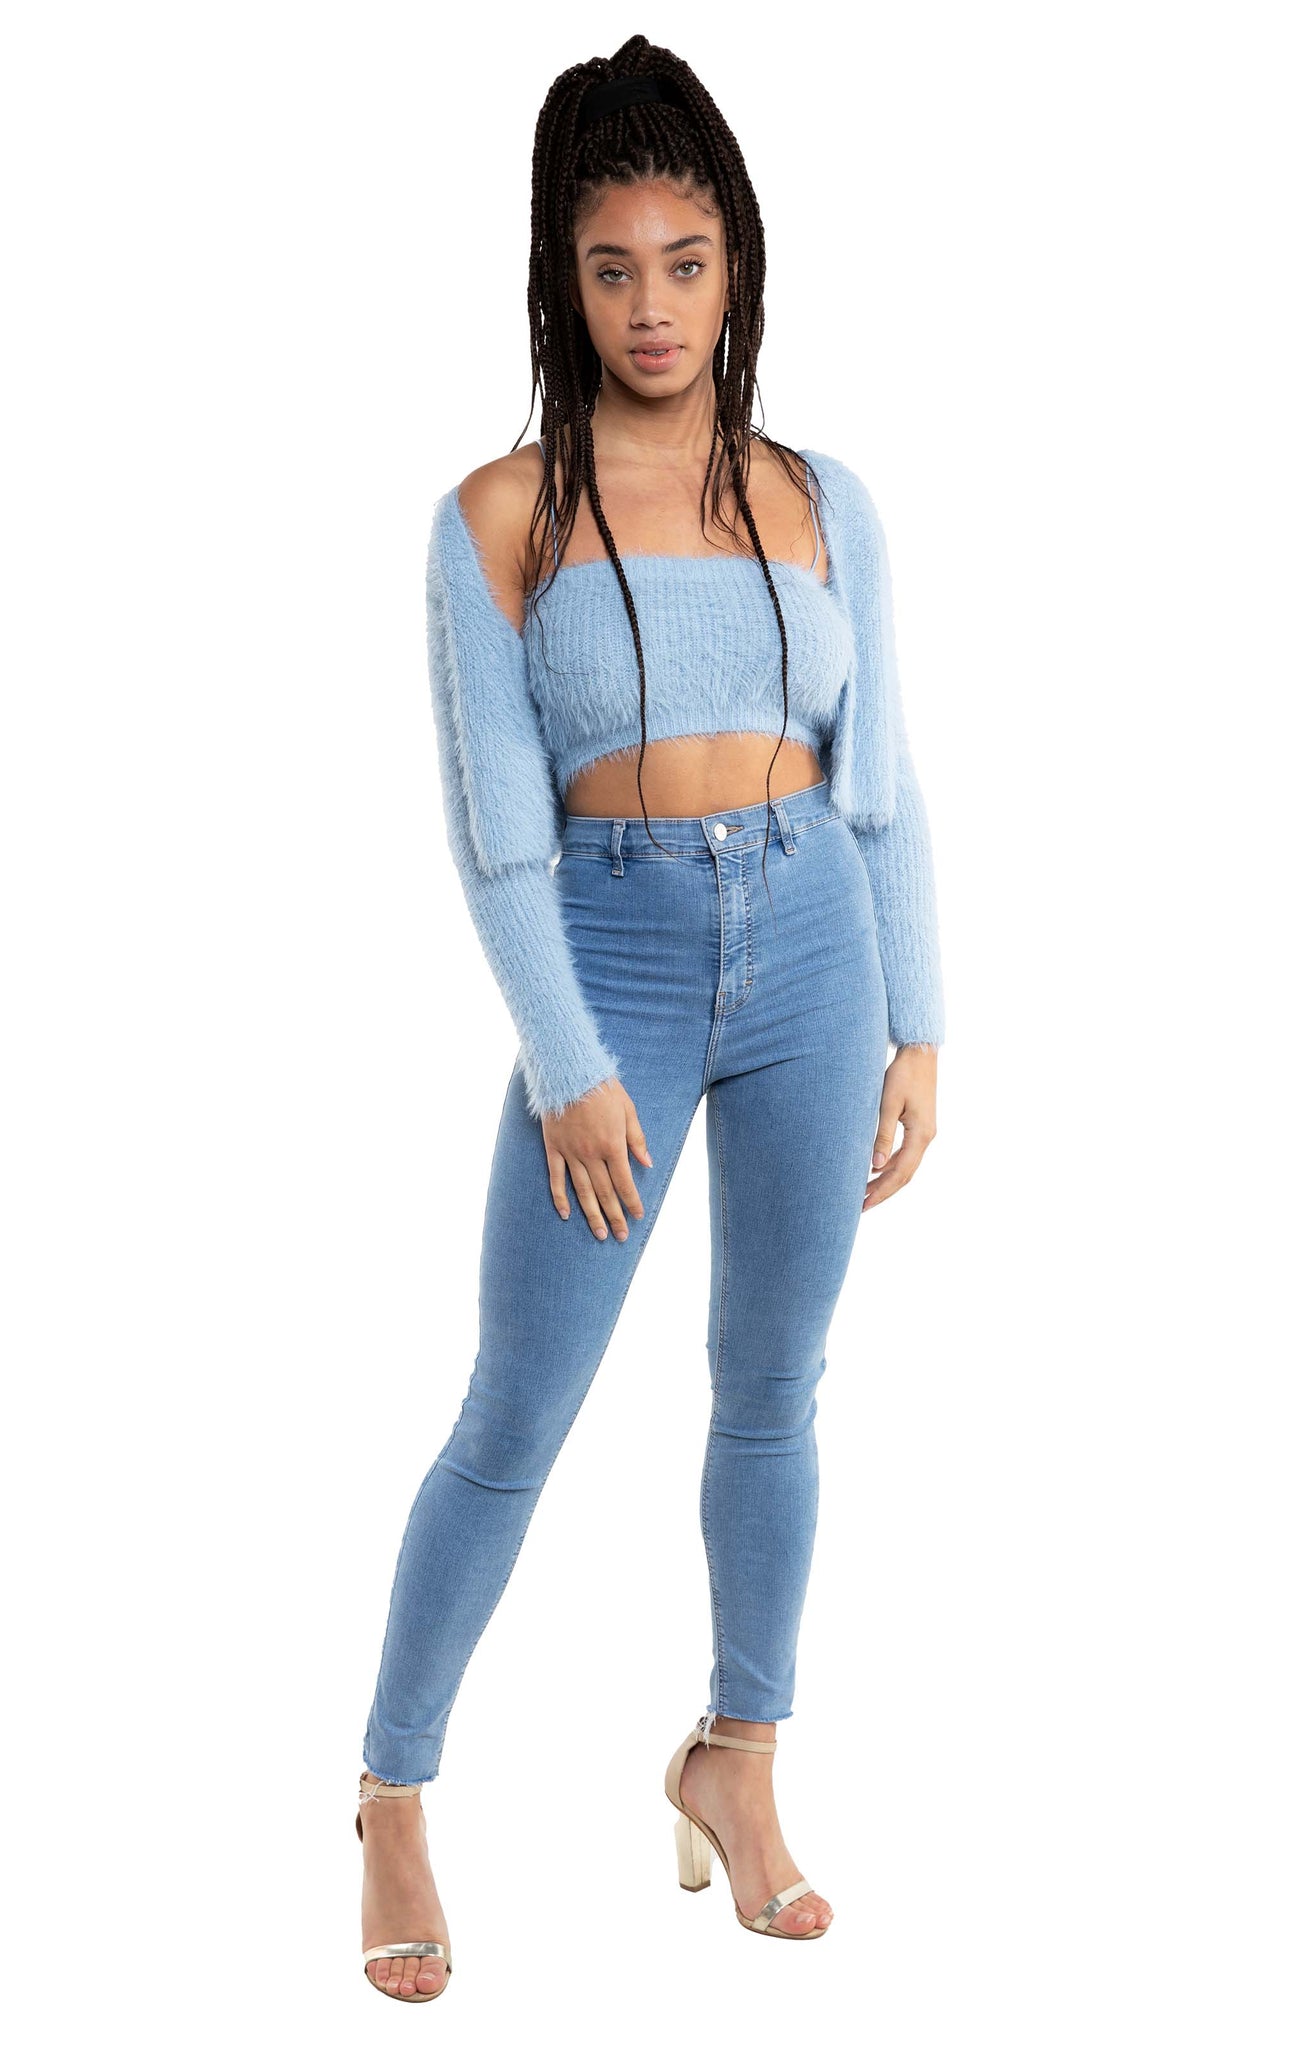 Zara Blue Soft Touch Crop Top And Cardigan Co-Ord UK S